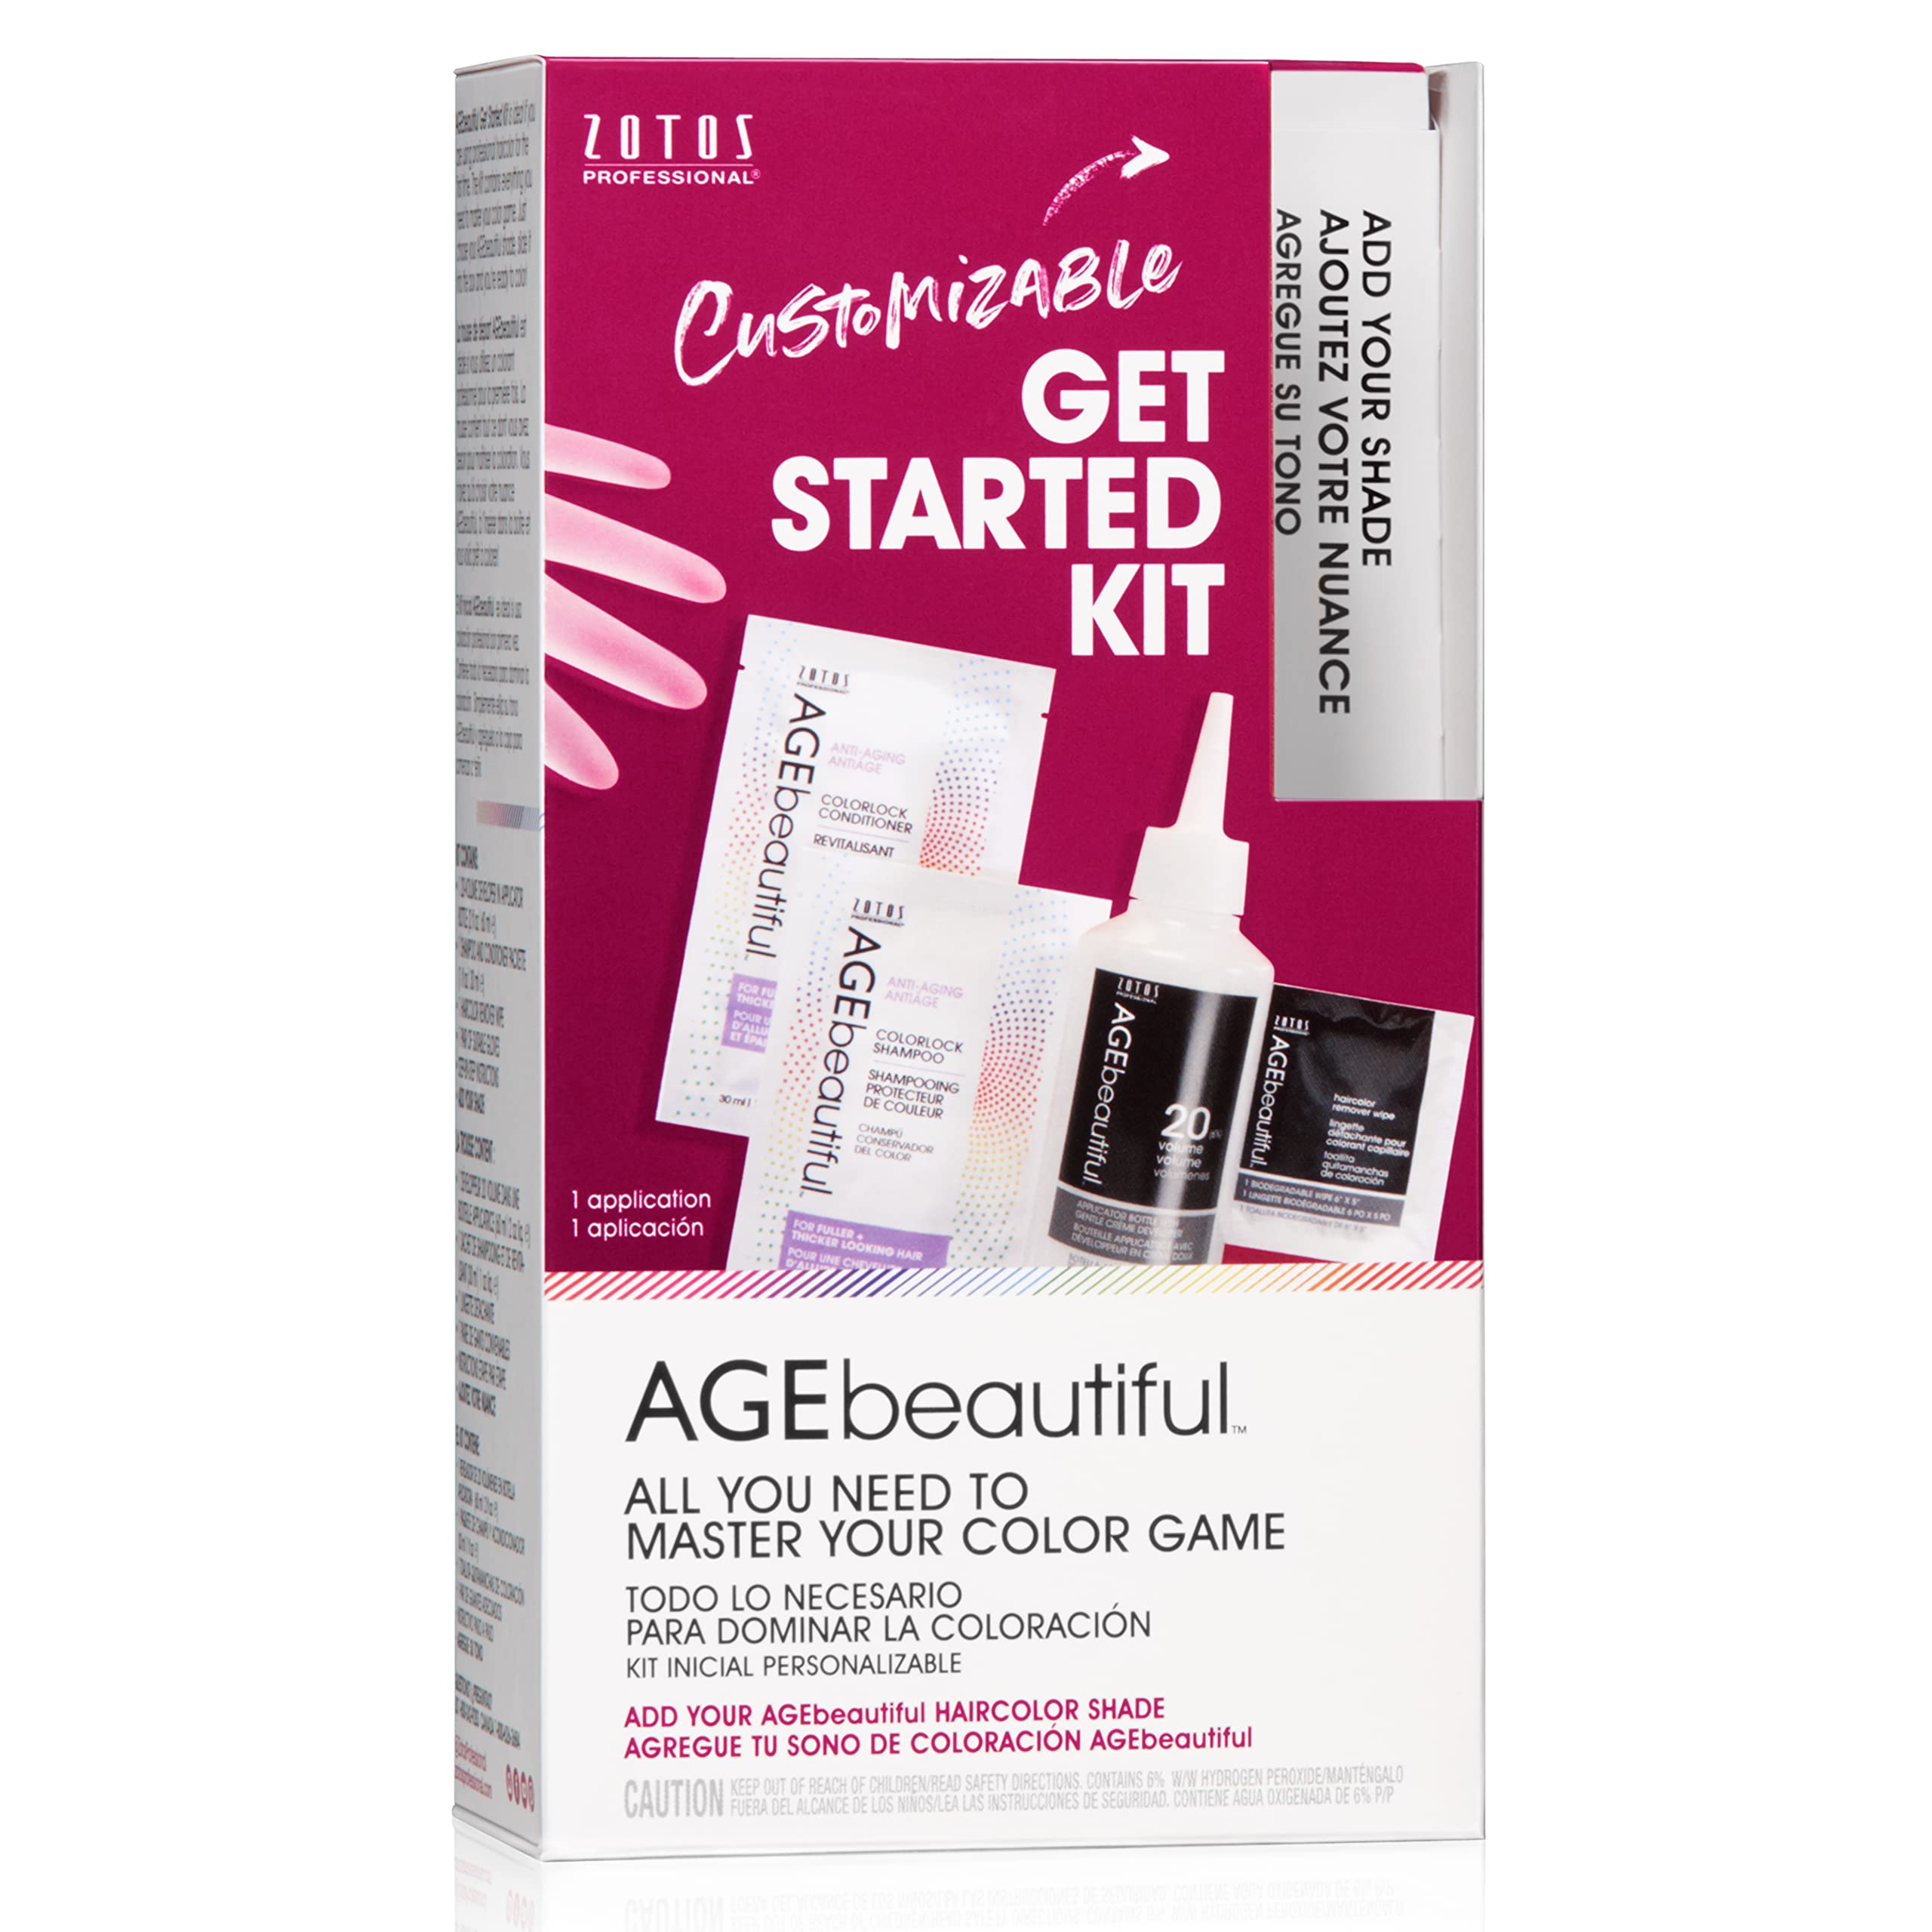 AGEbeautiful Permanent Liqui Creme Hair Color Dye Starter Kit | Developer | Applicator Bottle | Shampoo | Conditioner | Gloves | Salon Coloring Tools | Everything You Need